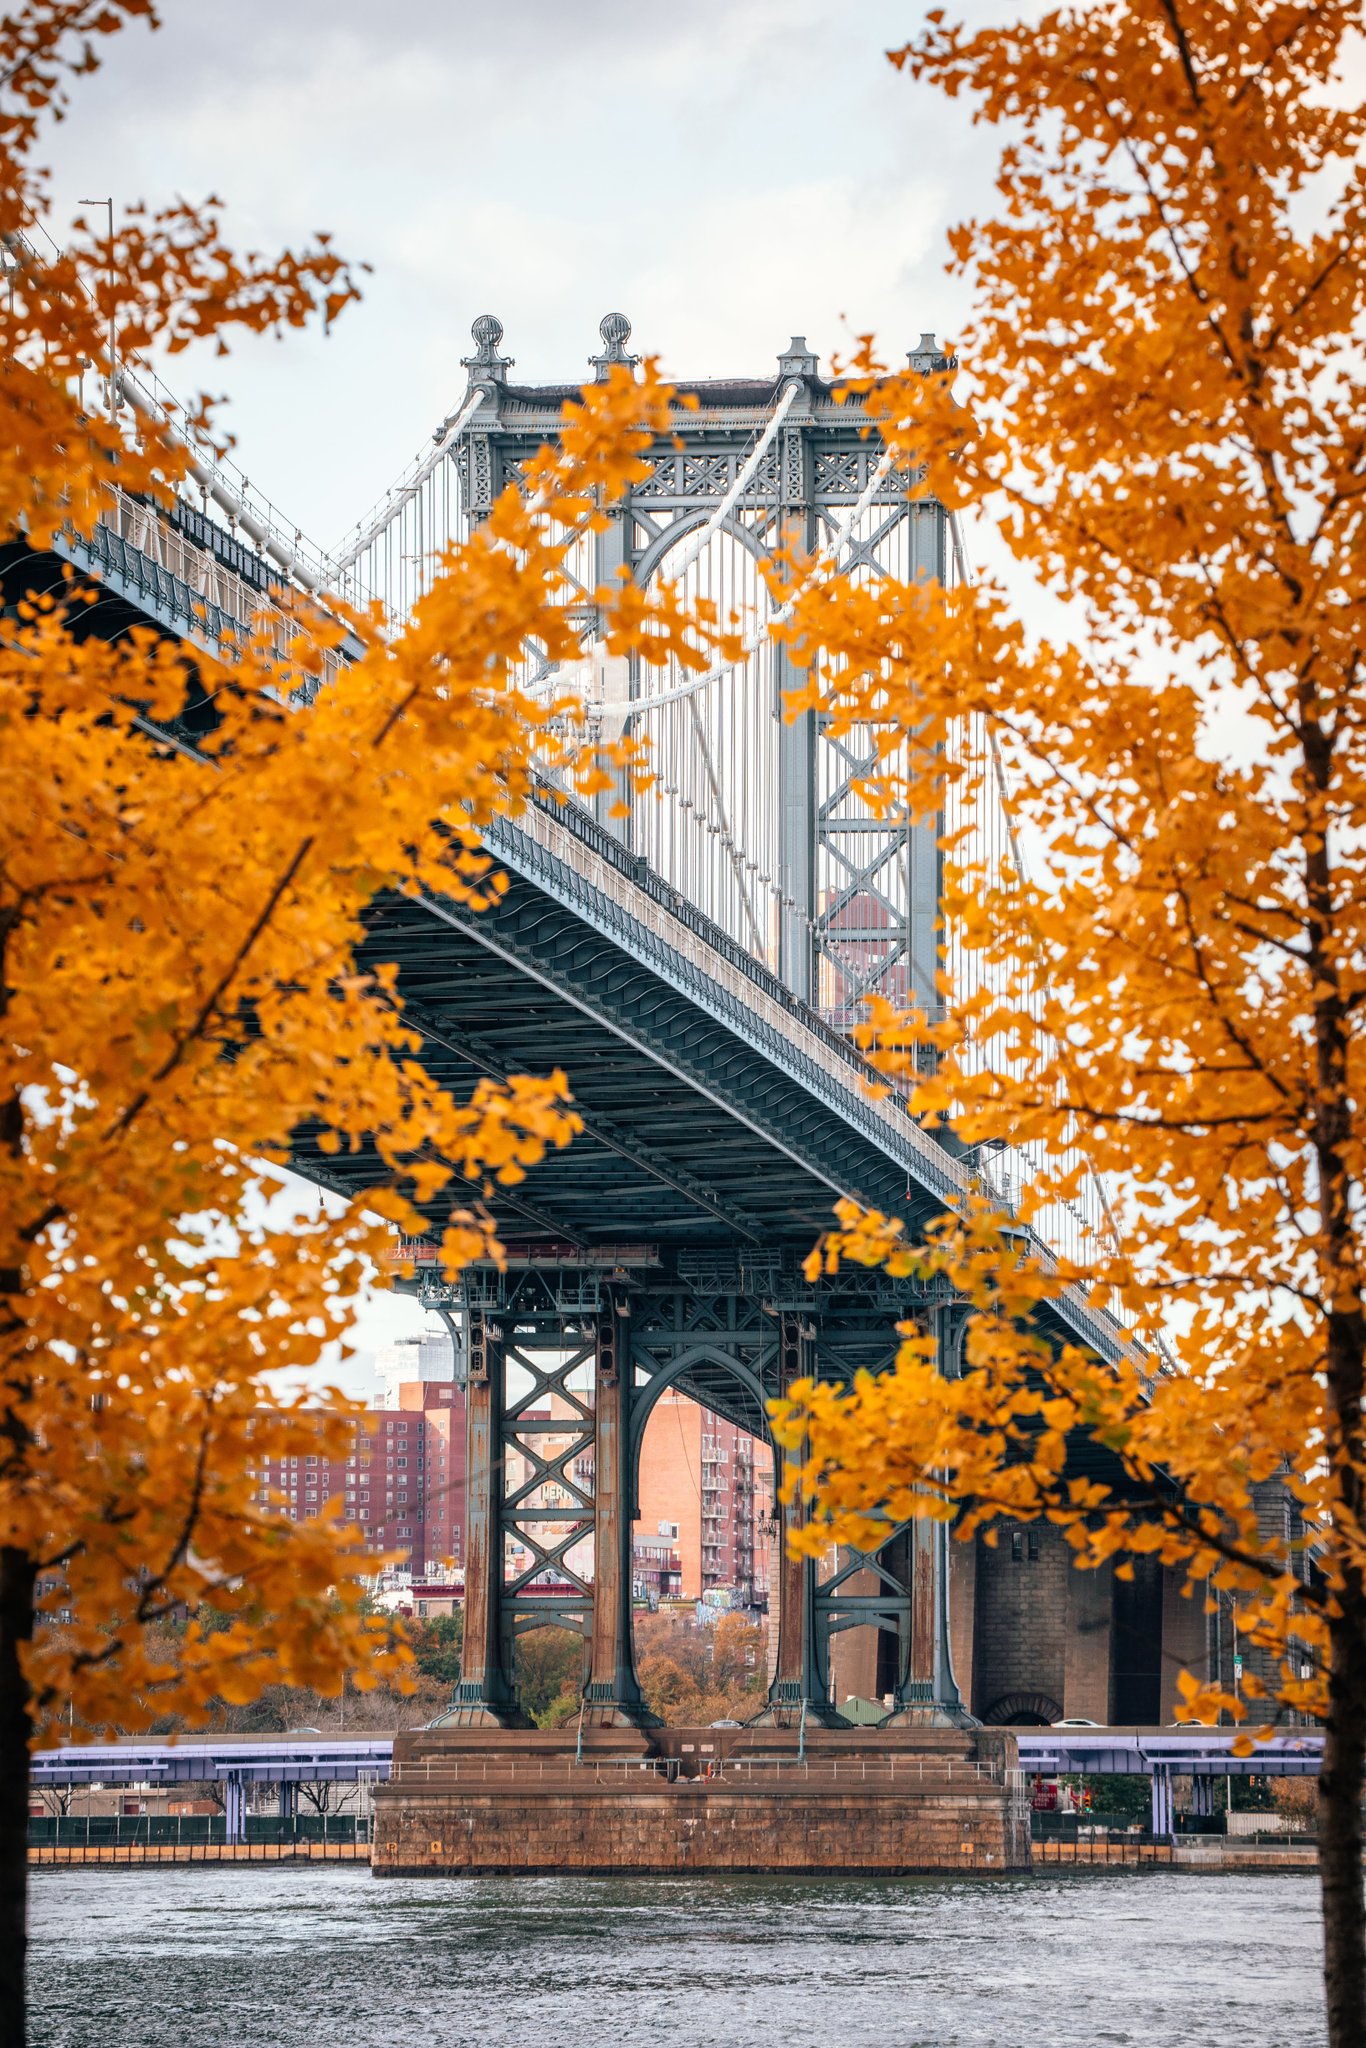 I LOVE NEW YORK Week 3 of the Fall Foliage Report! Check out our interactive map to see color changes near you and across the state with colorful fall